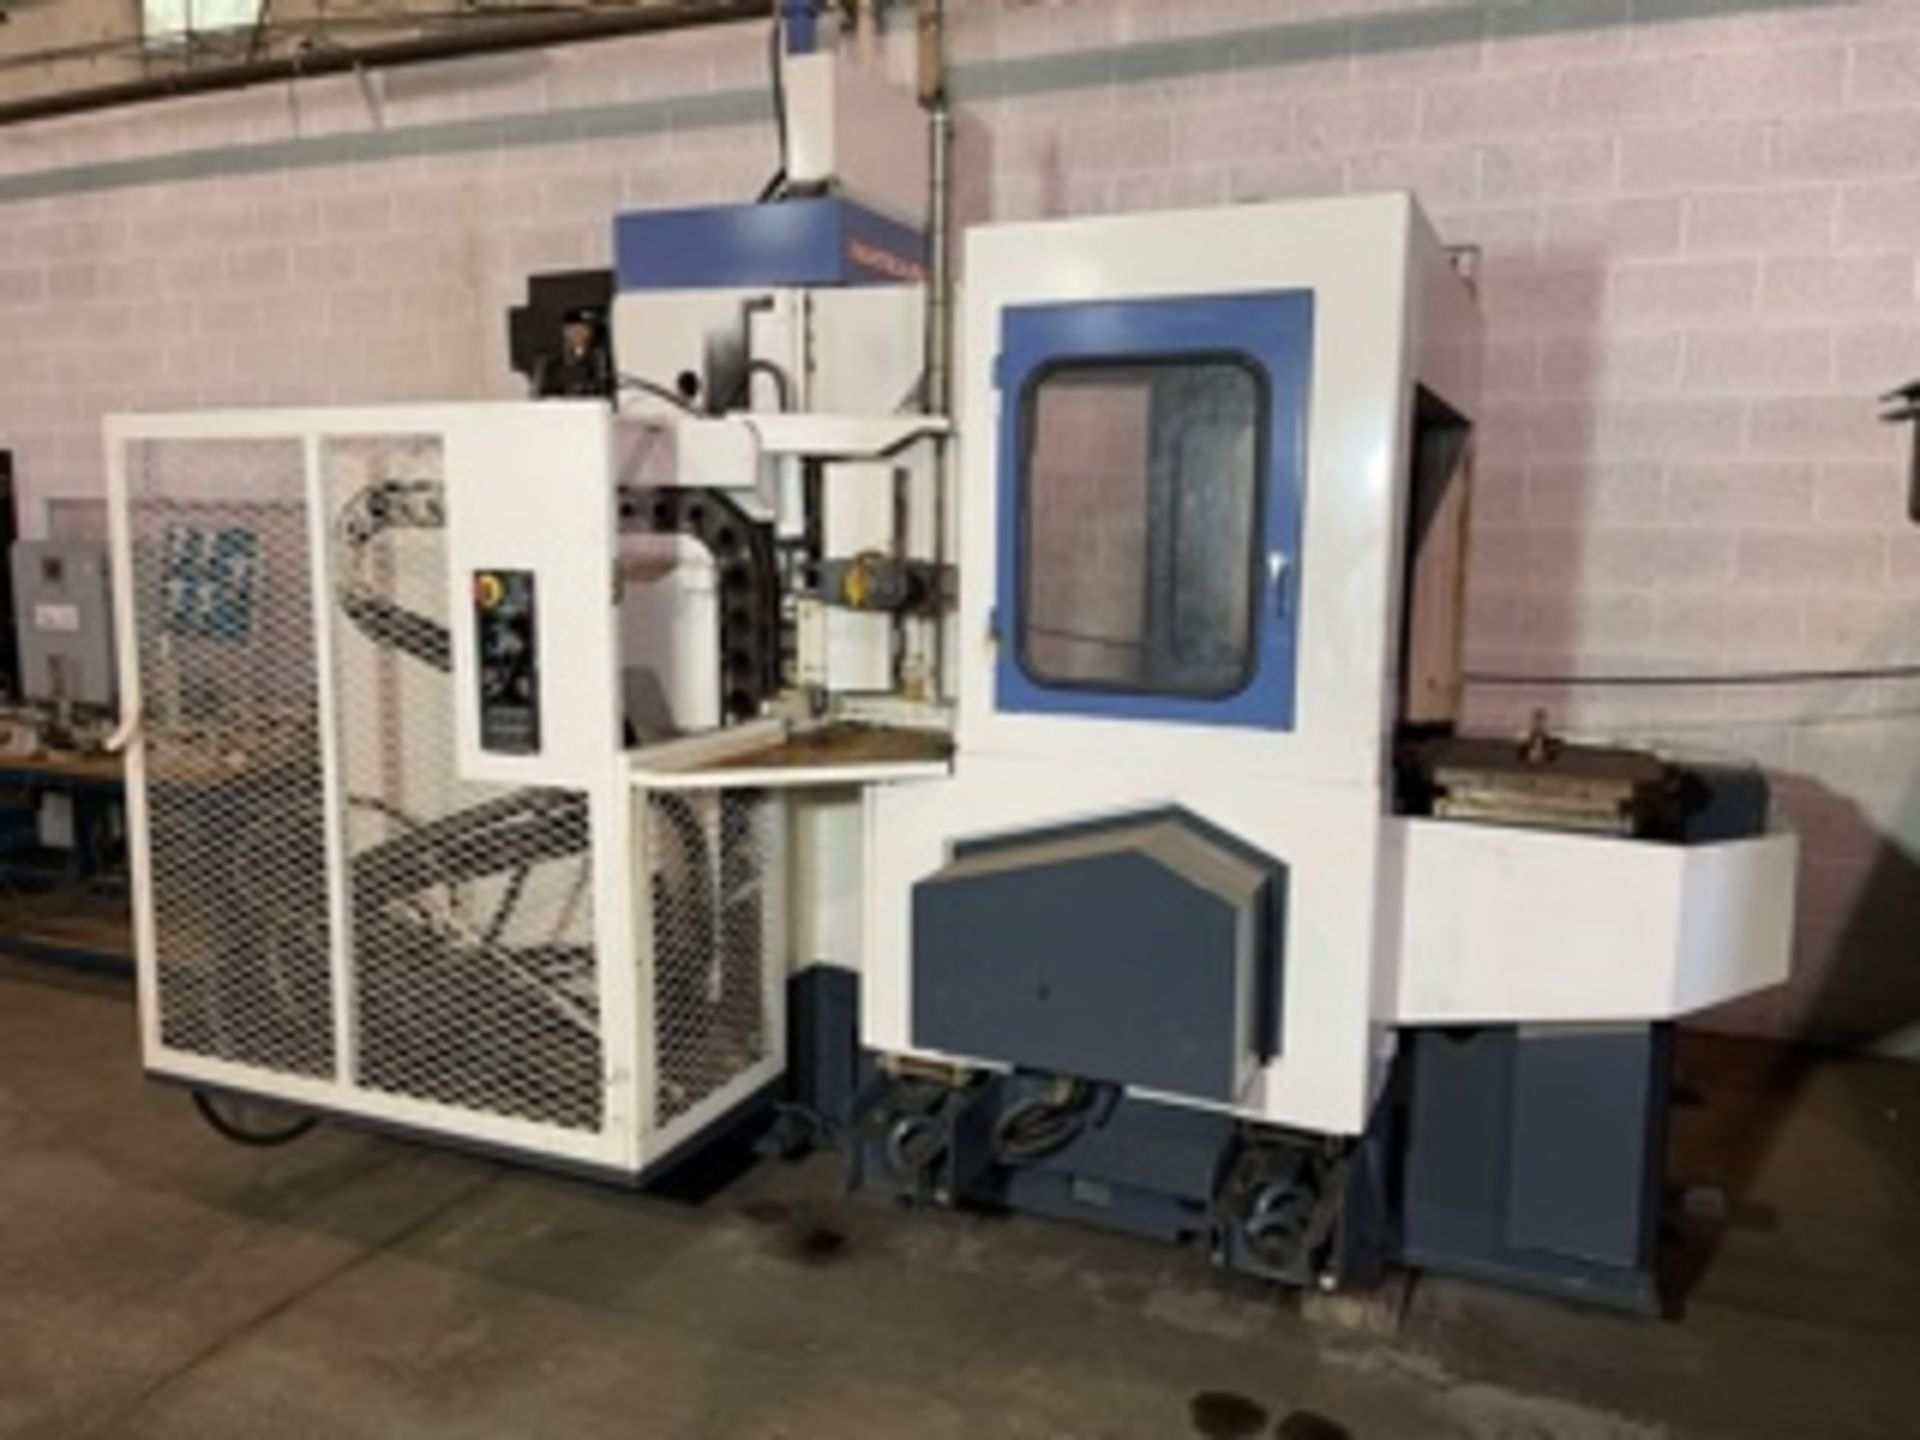 Lot, (3) Used CNC Machining Centers in Storage; (1) Matsuura Horzontal Machining Center with 6-